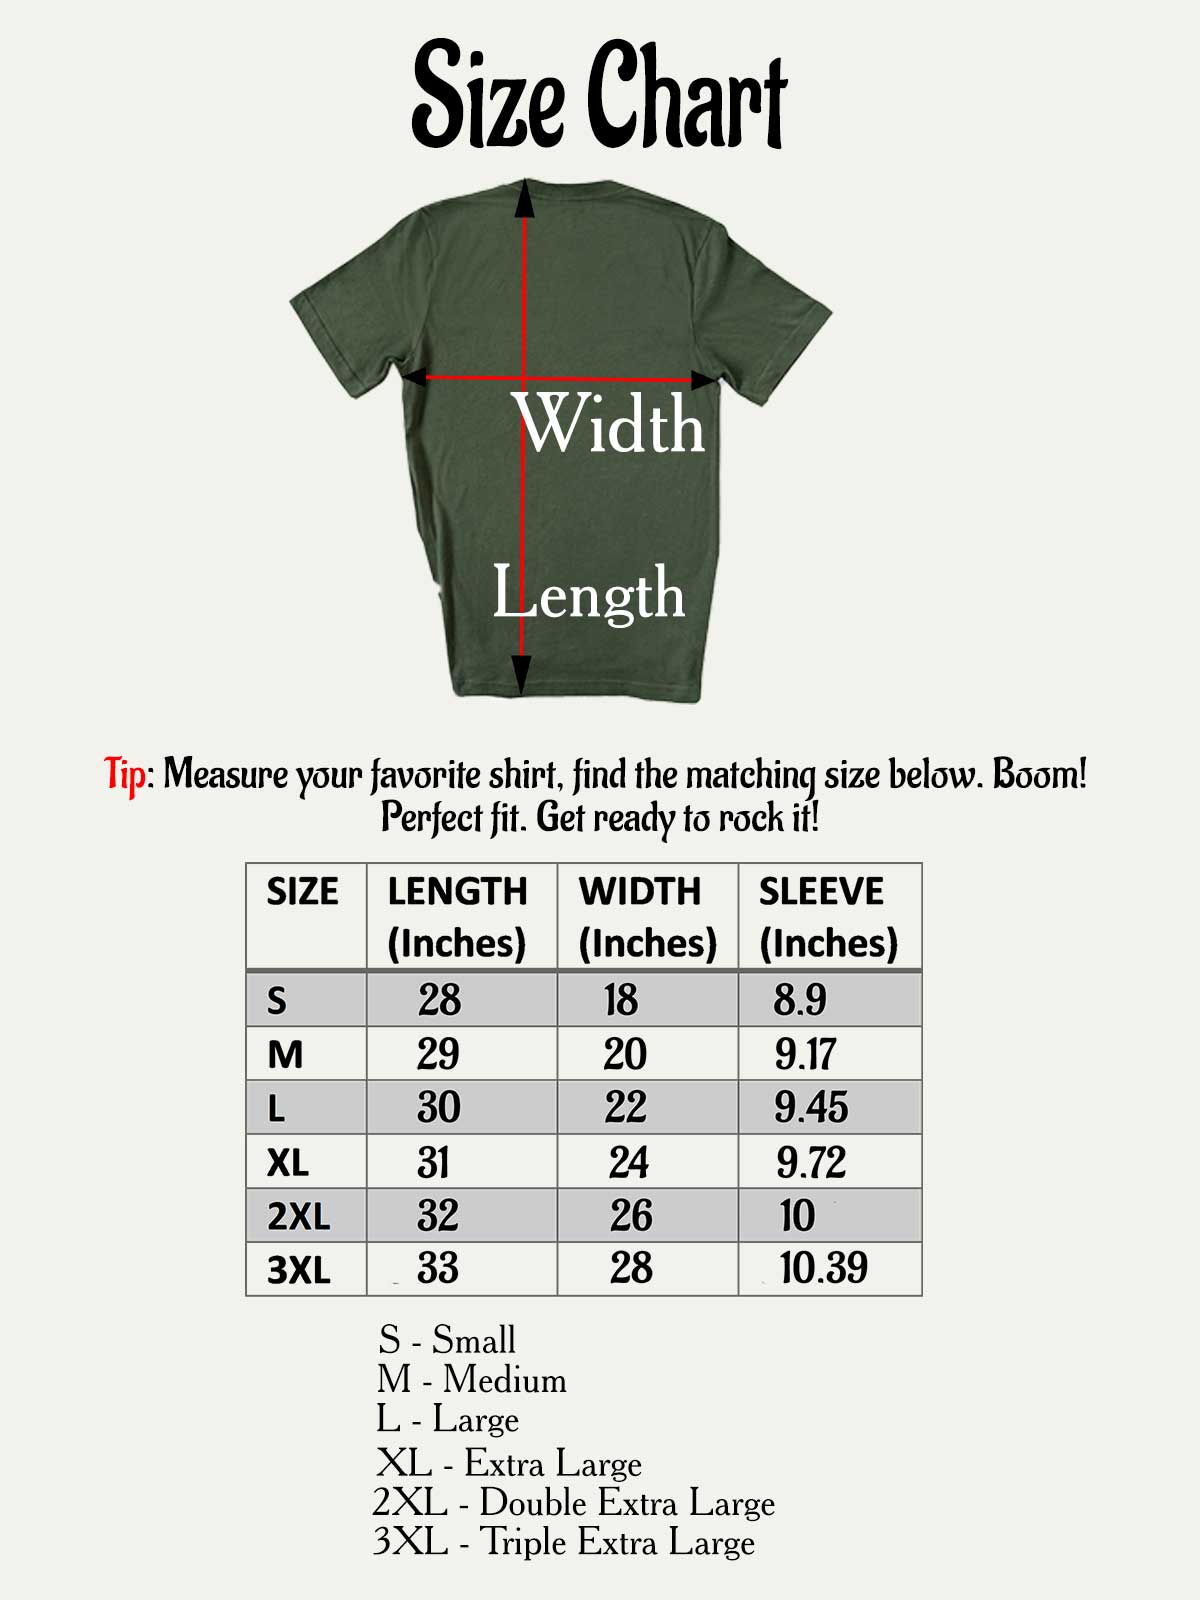 the size chart for a t - shirt with measurements